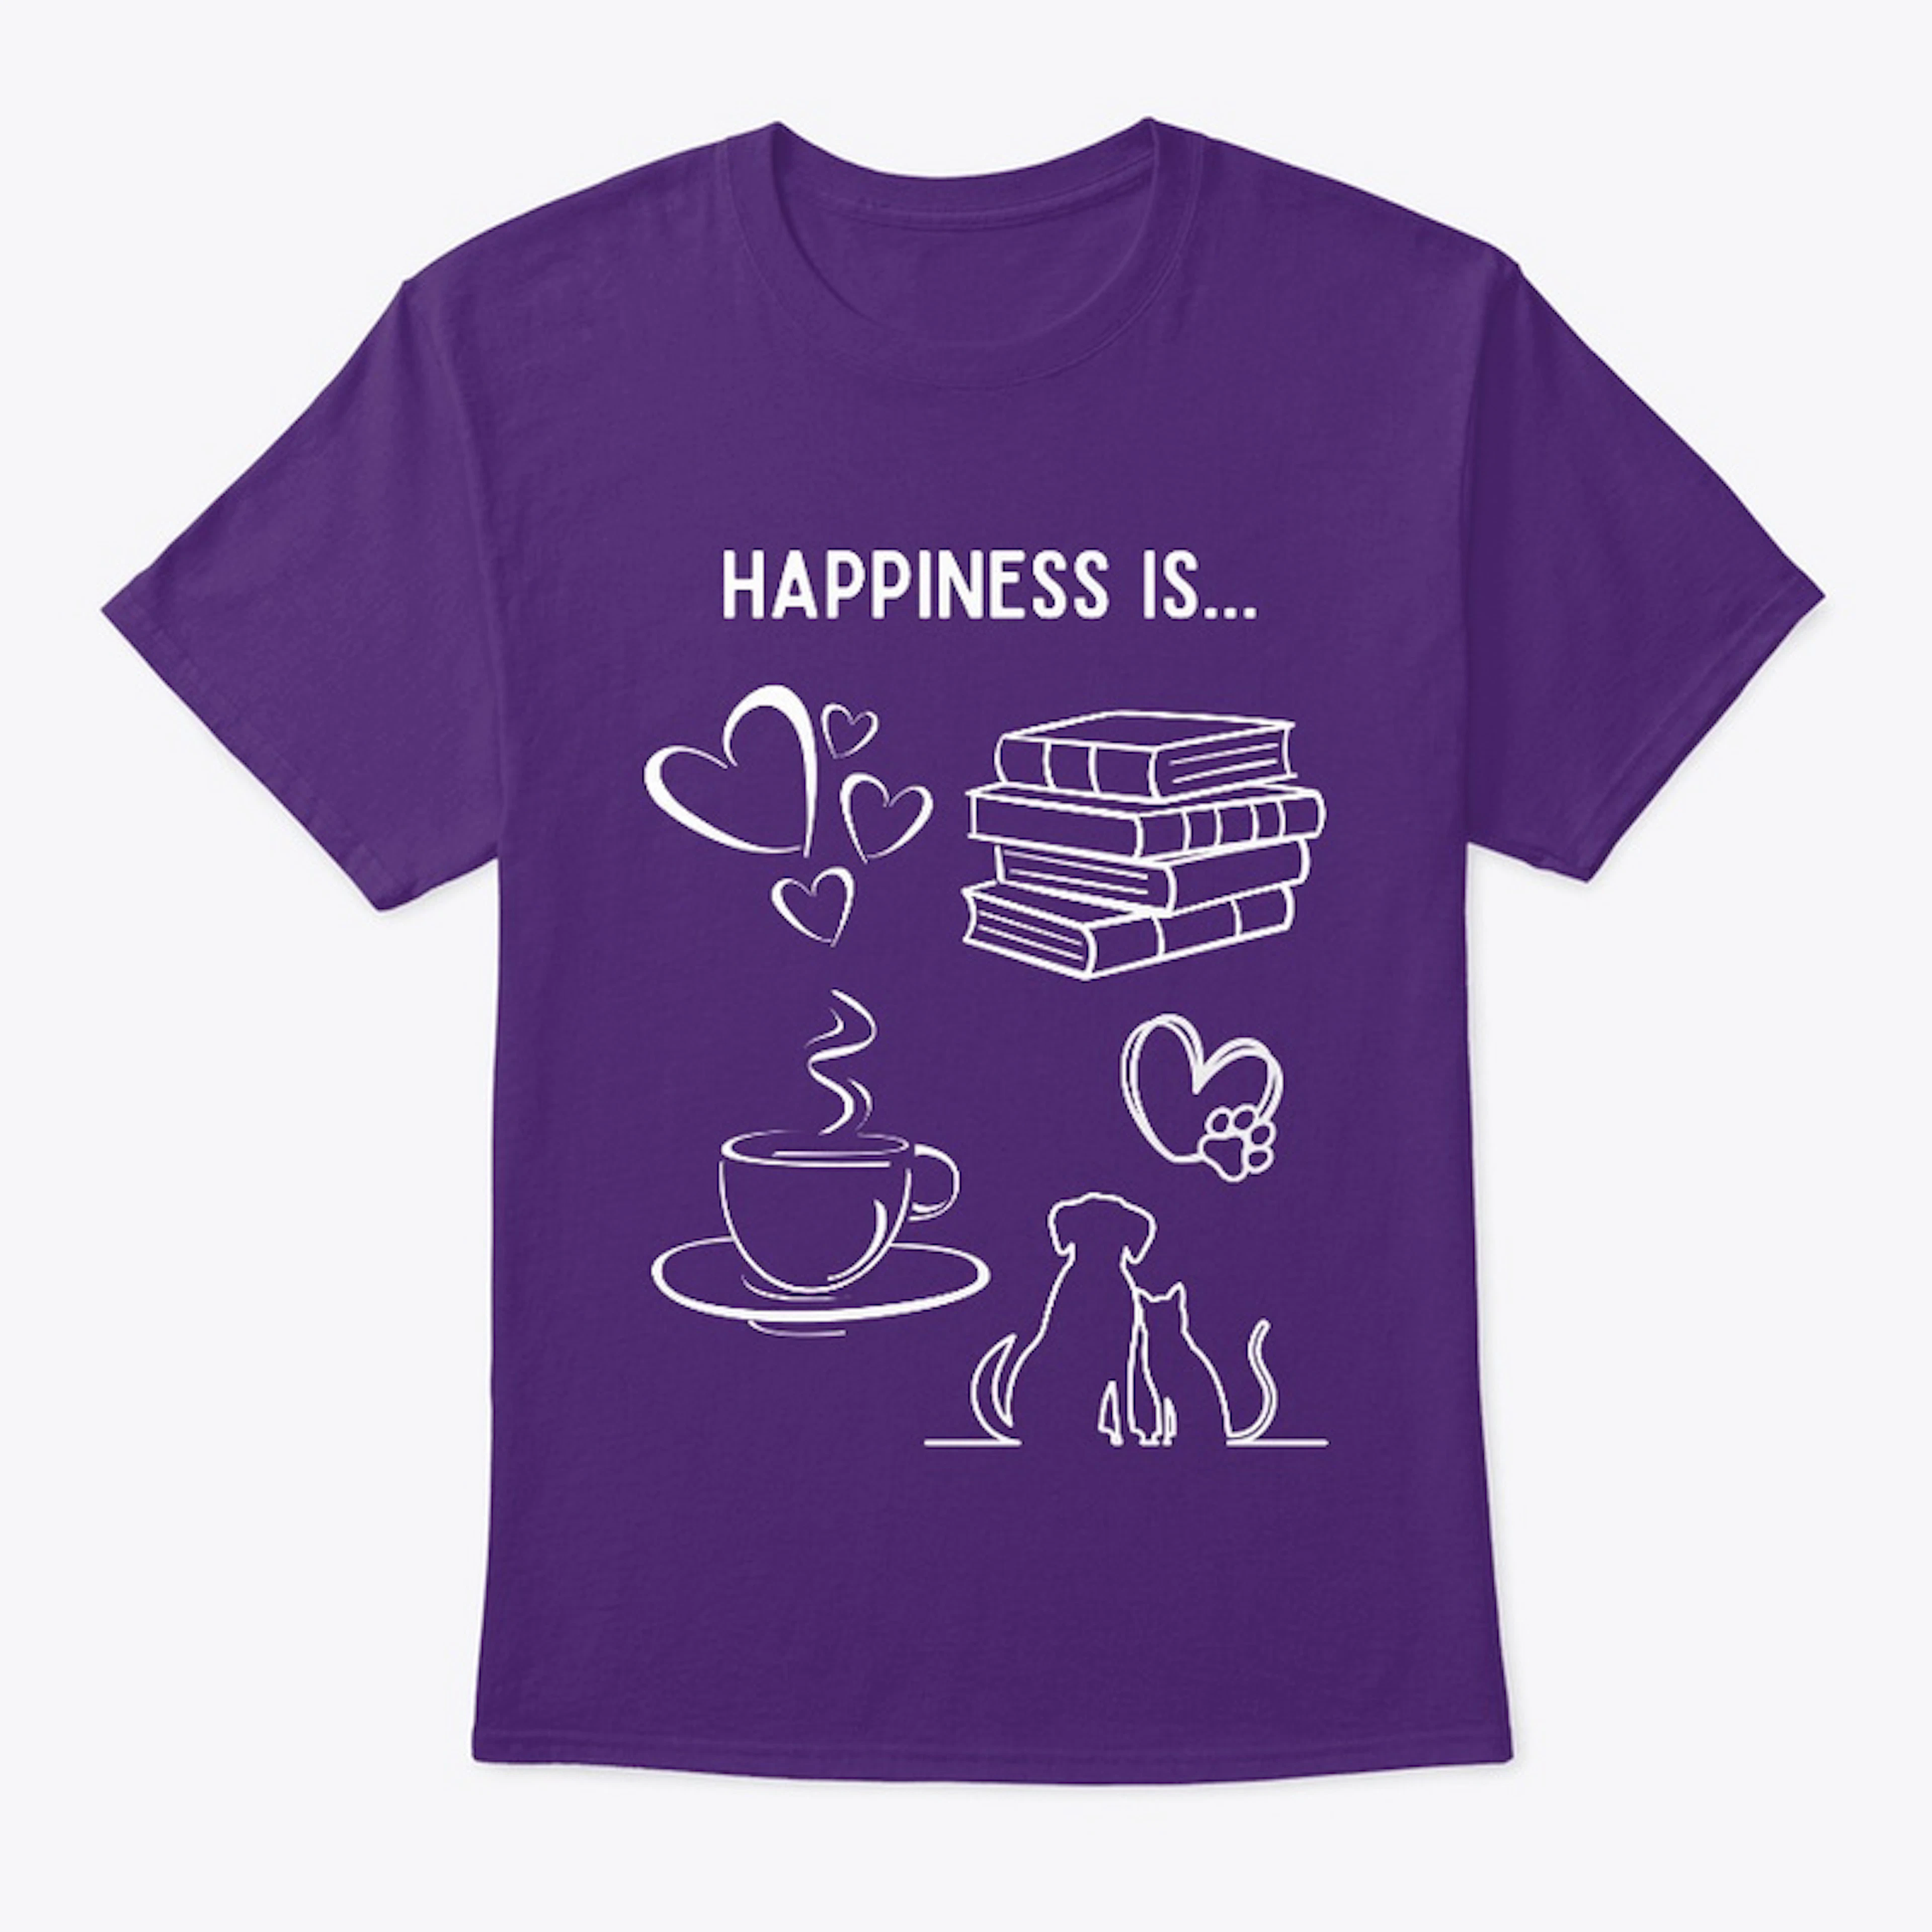 Happiness Is... shirt